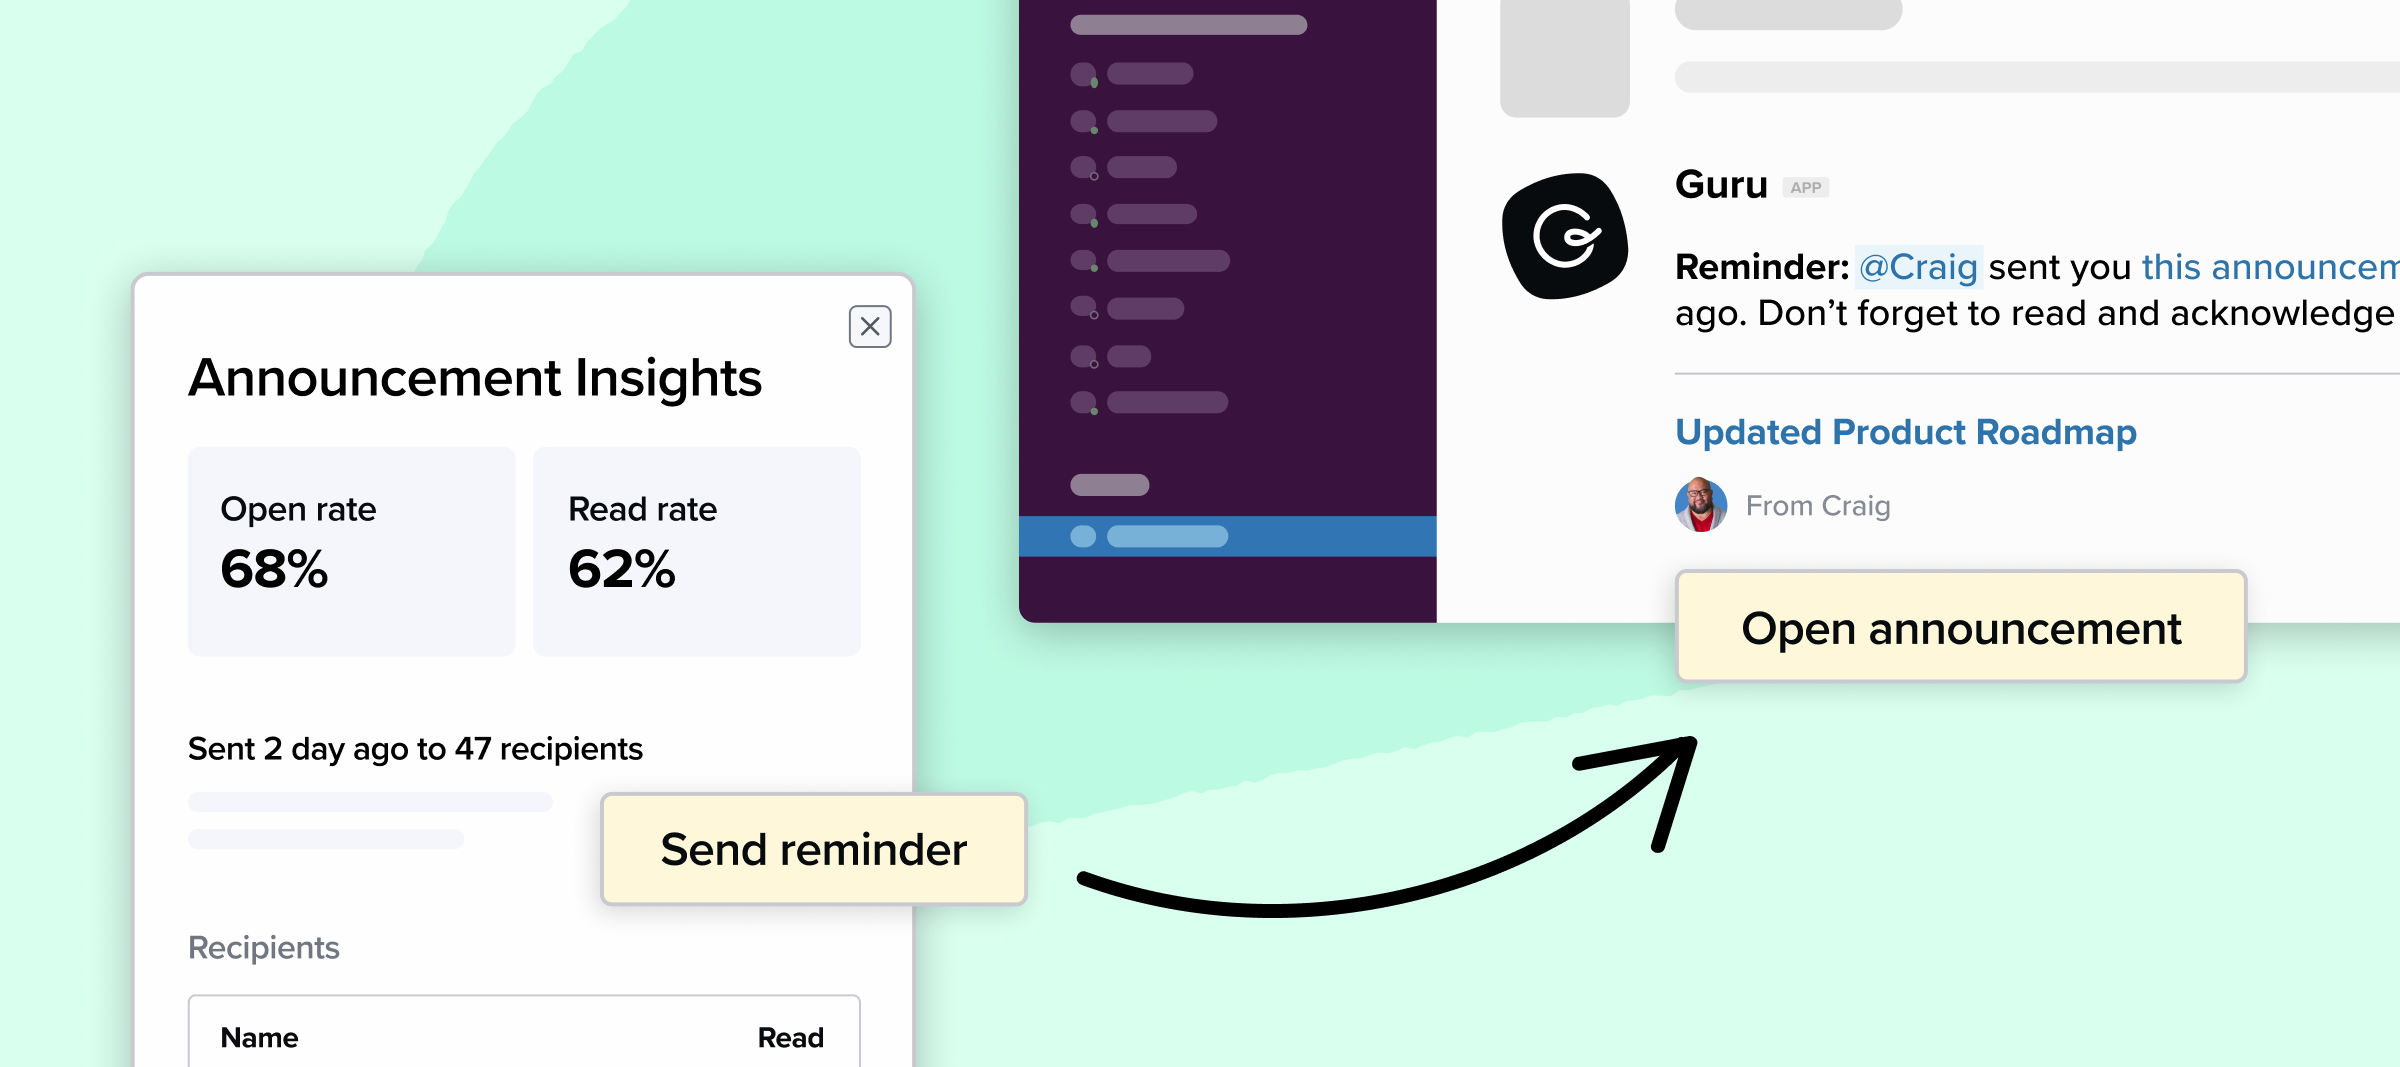 Announcements updates: reminders and improved reader experience